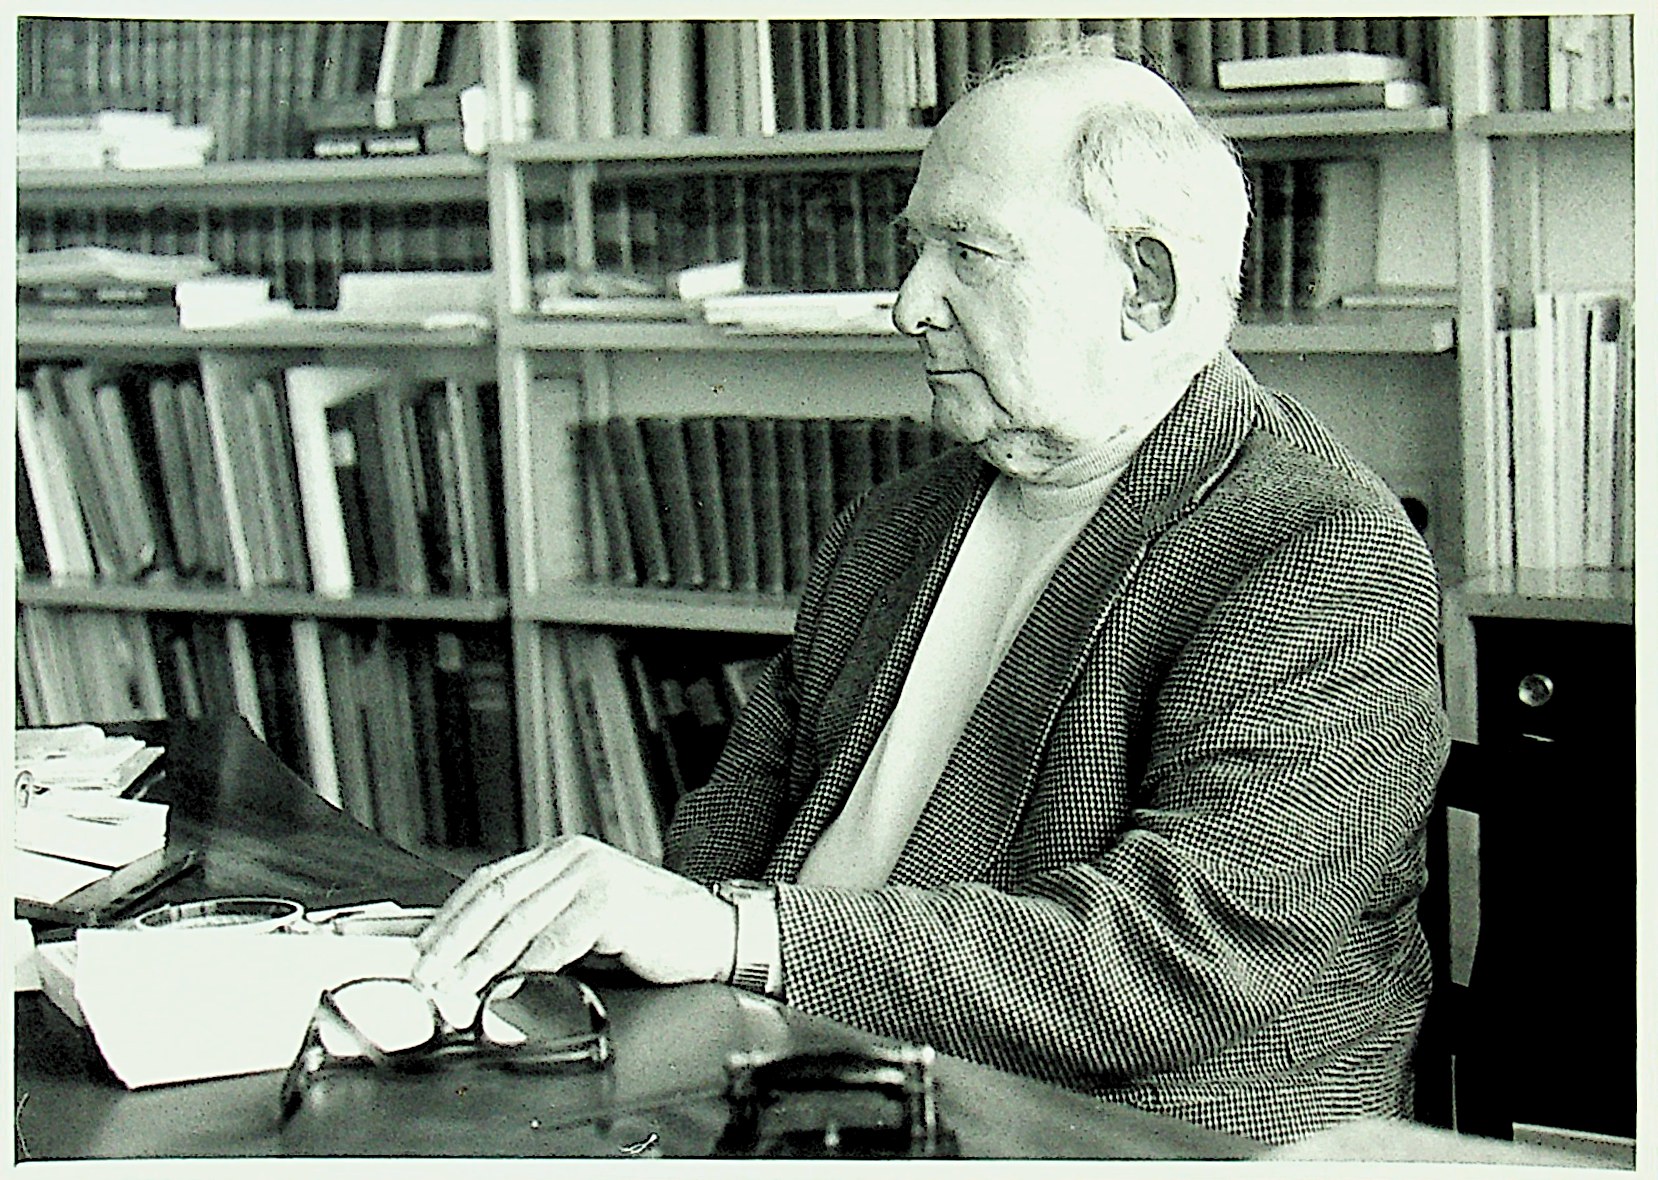 Plessner at a later age, in his home in Erlangen